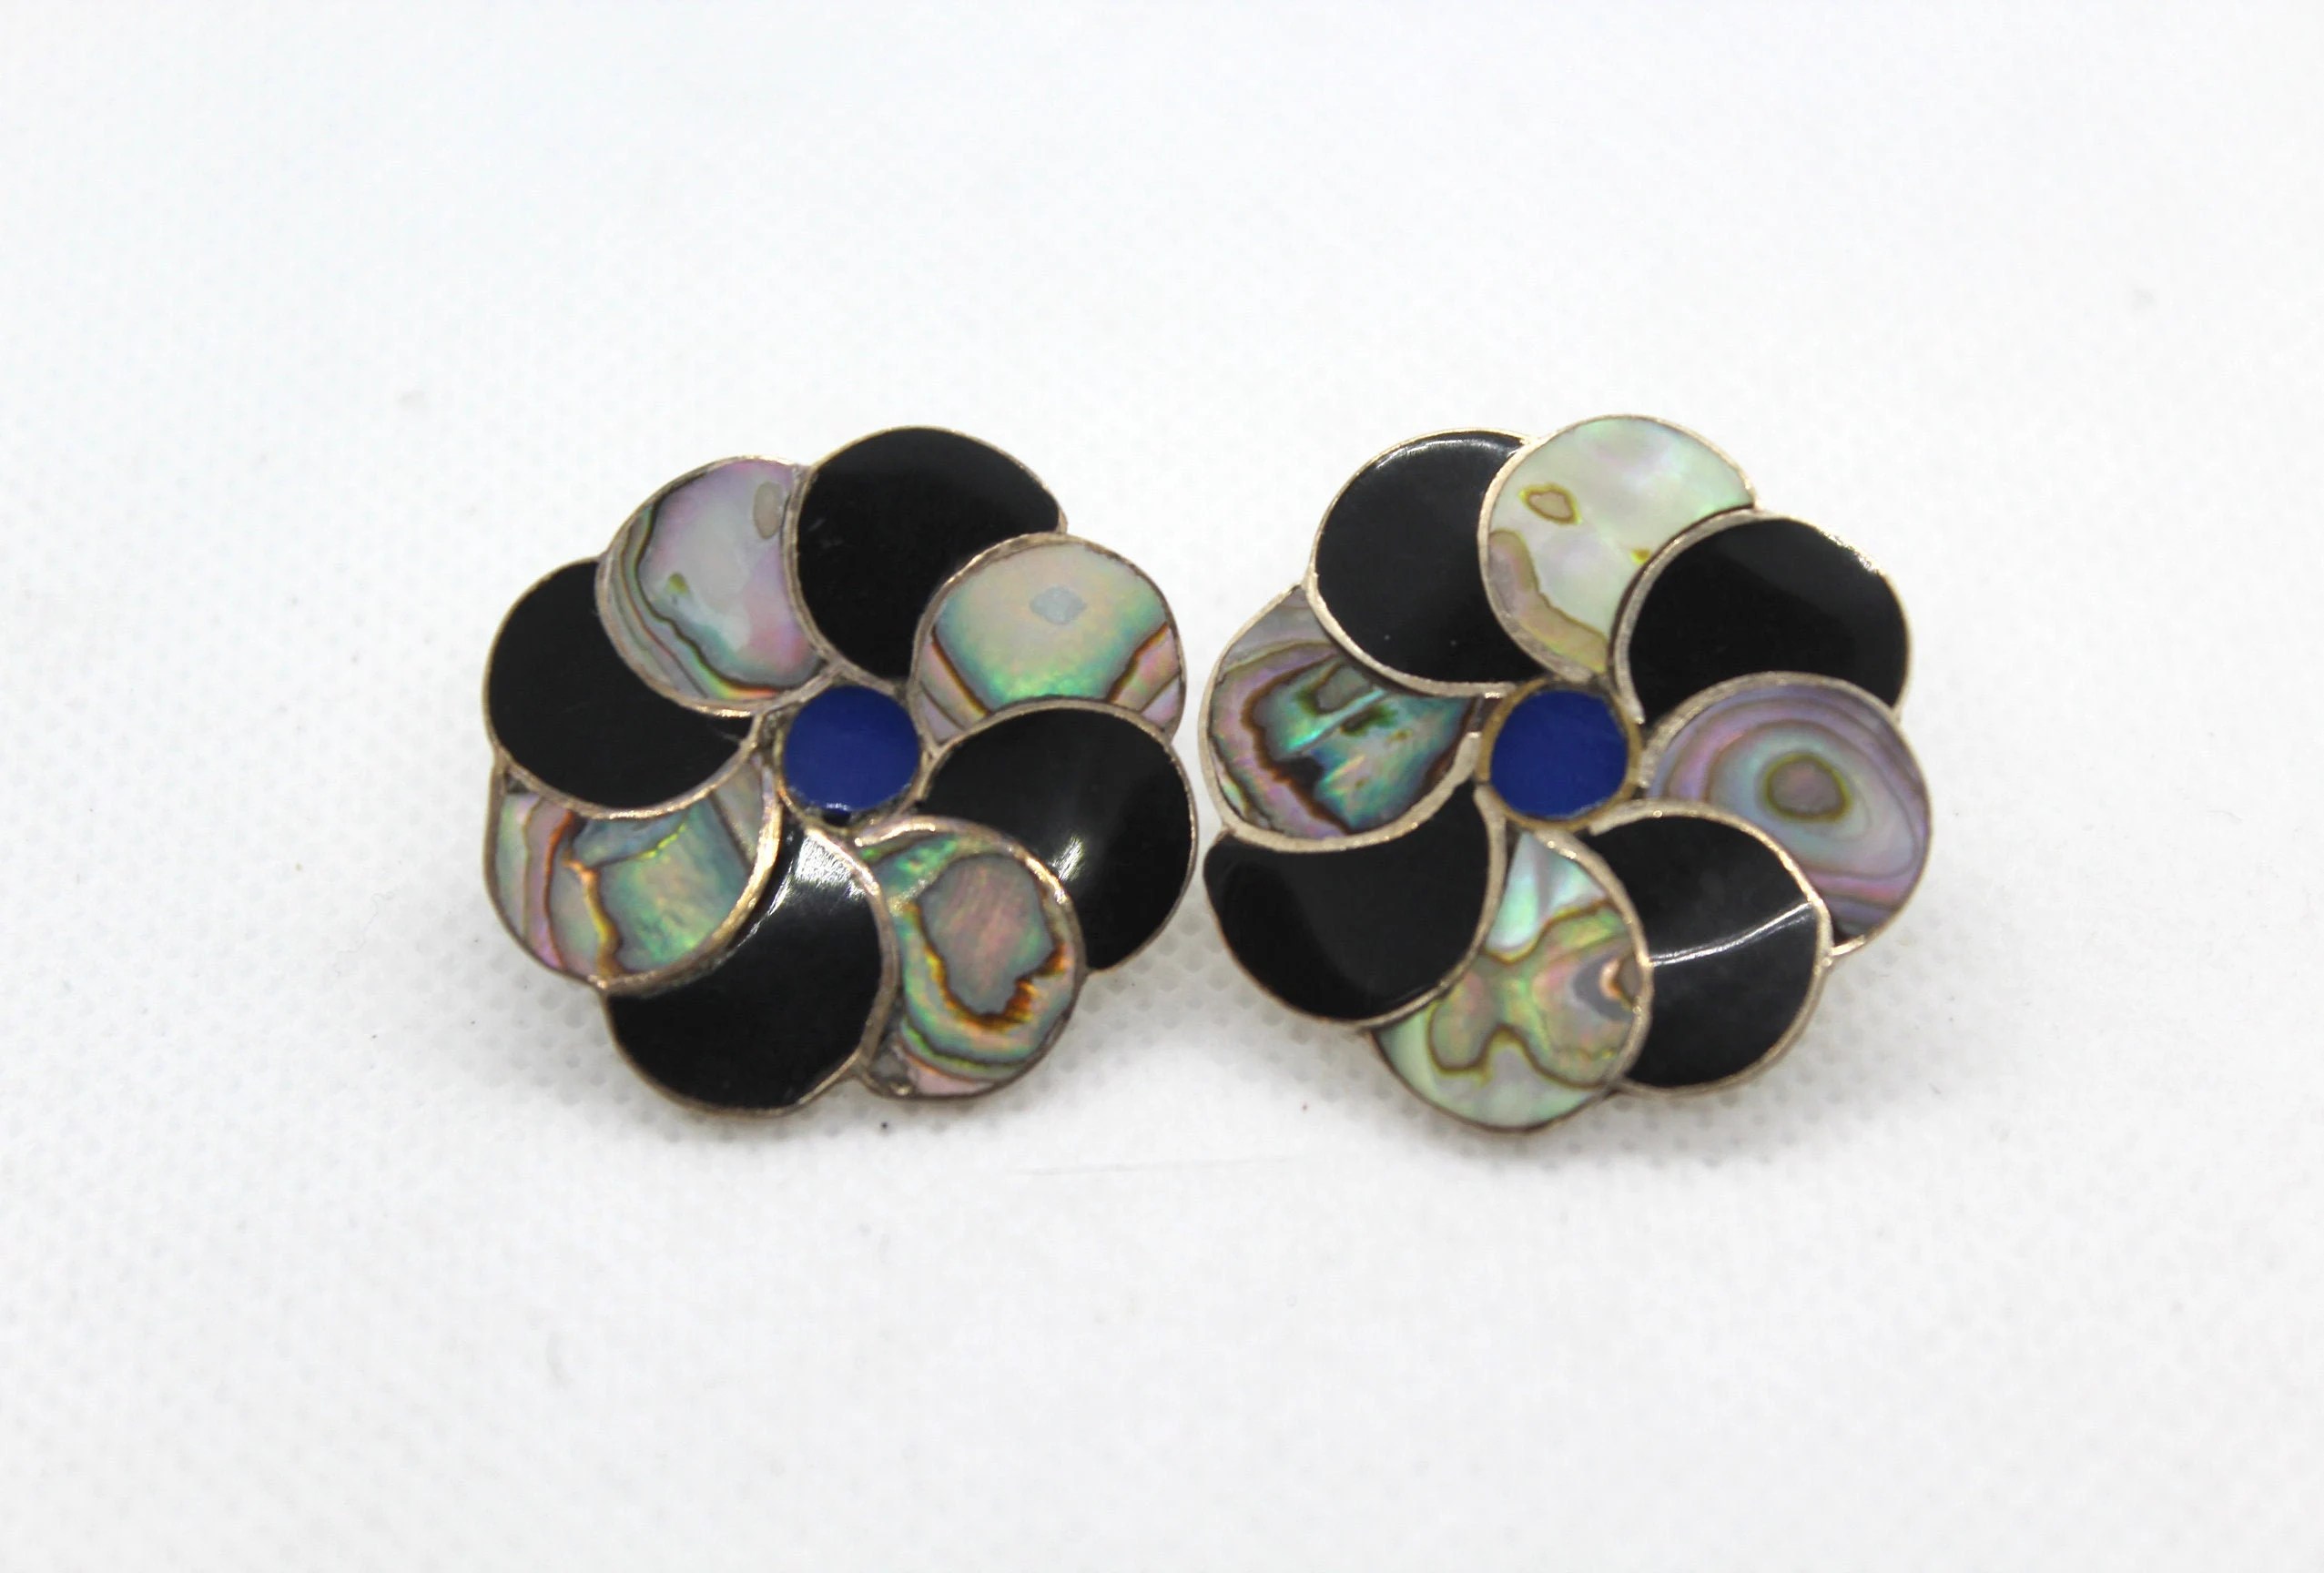 Taxco Signed 925 Sterling Silver Jet & Abalone Shell Pinwheel Earrings - Vintage Fine Jewelry at Whispering City RVA - USA Free Shipping